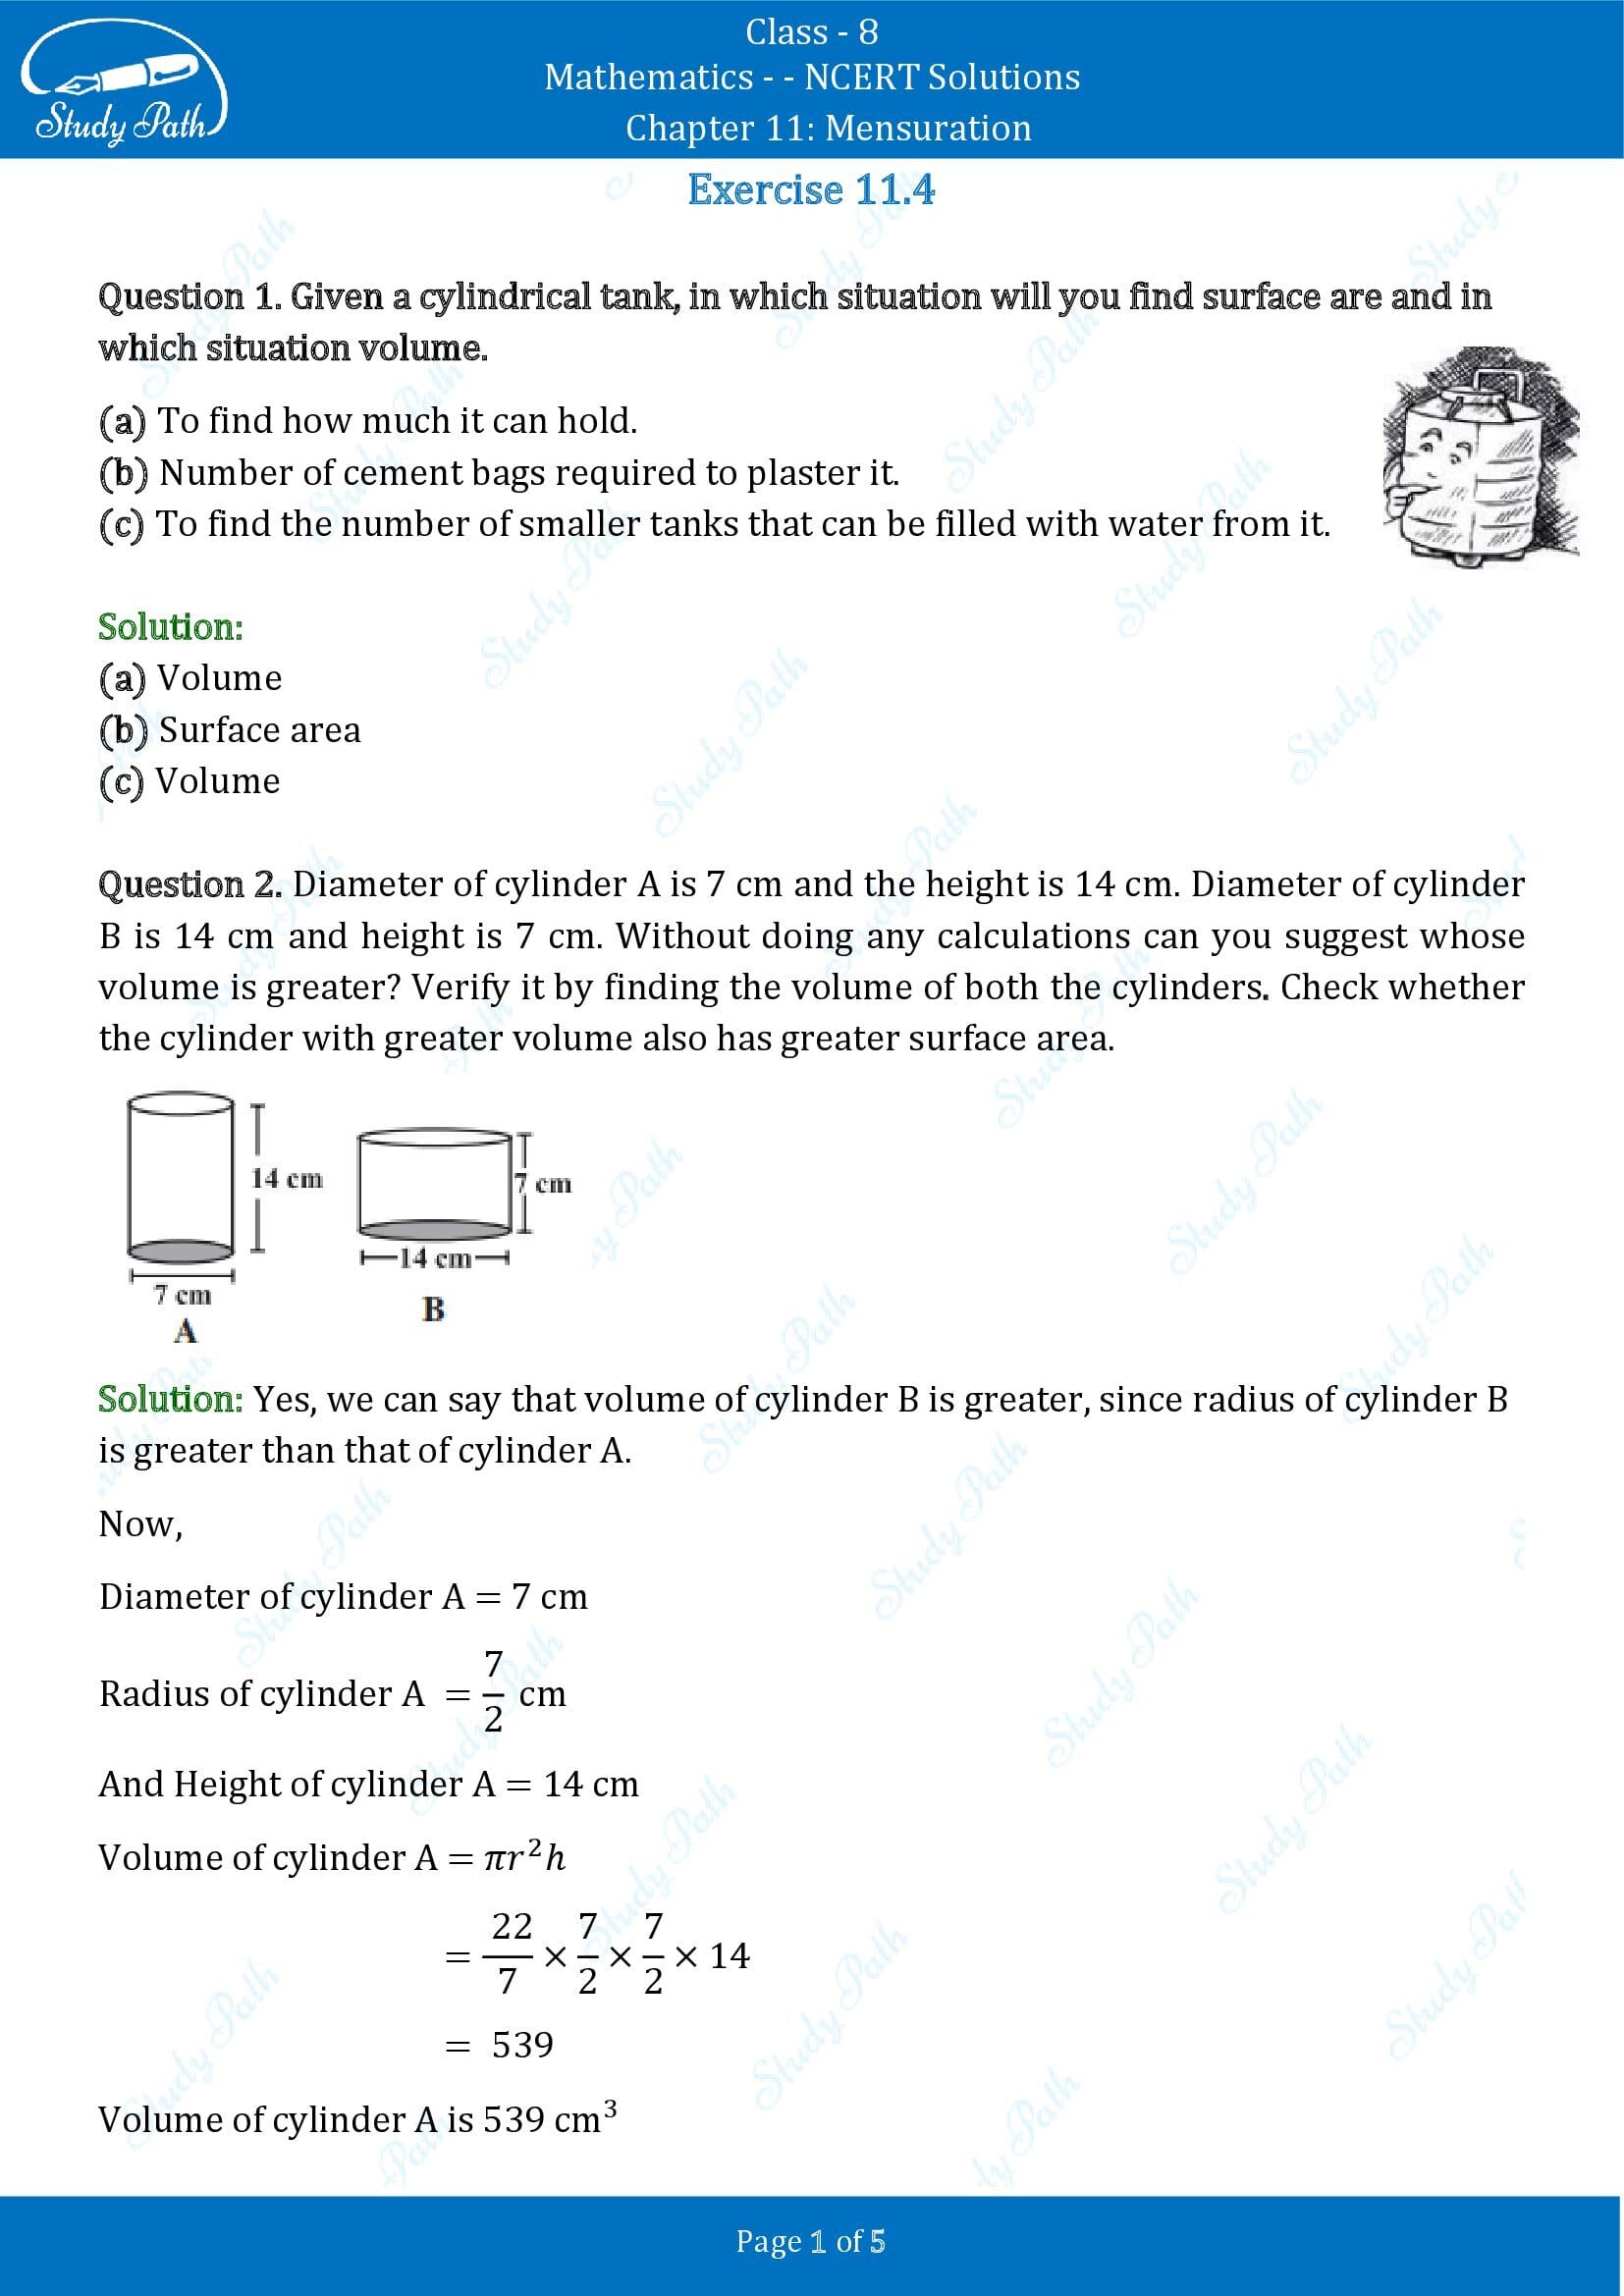 NCERT Solutions for Class 8 Maths Chapter 11 Mensuration Exercise 11.4 00001